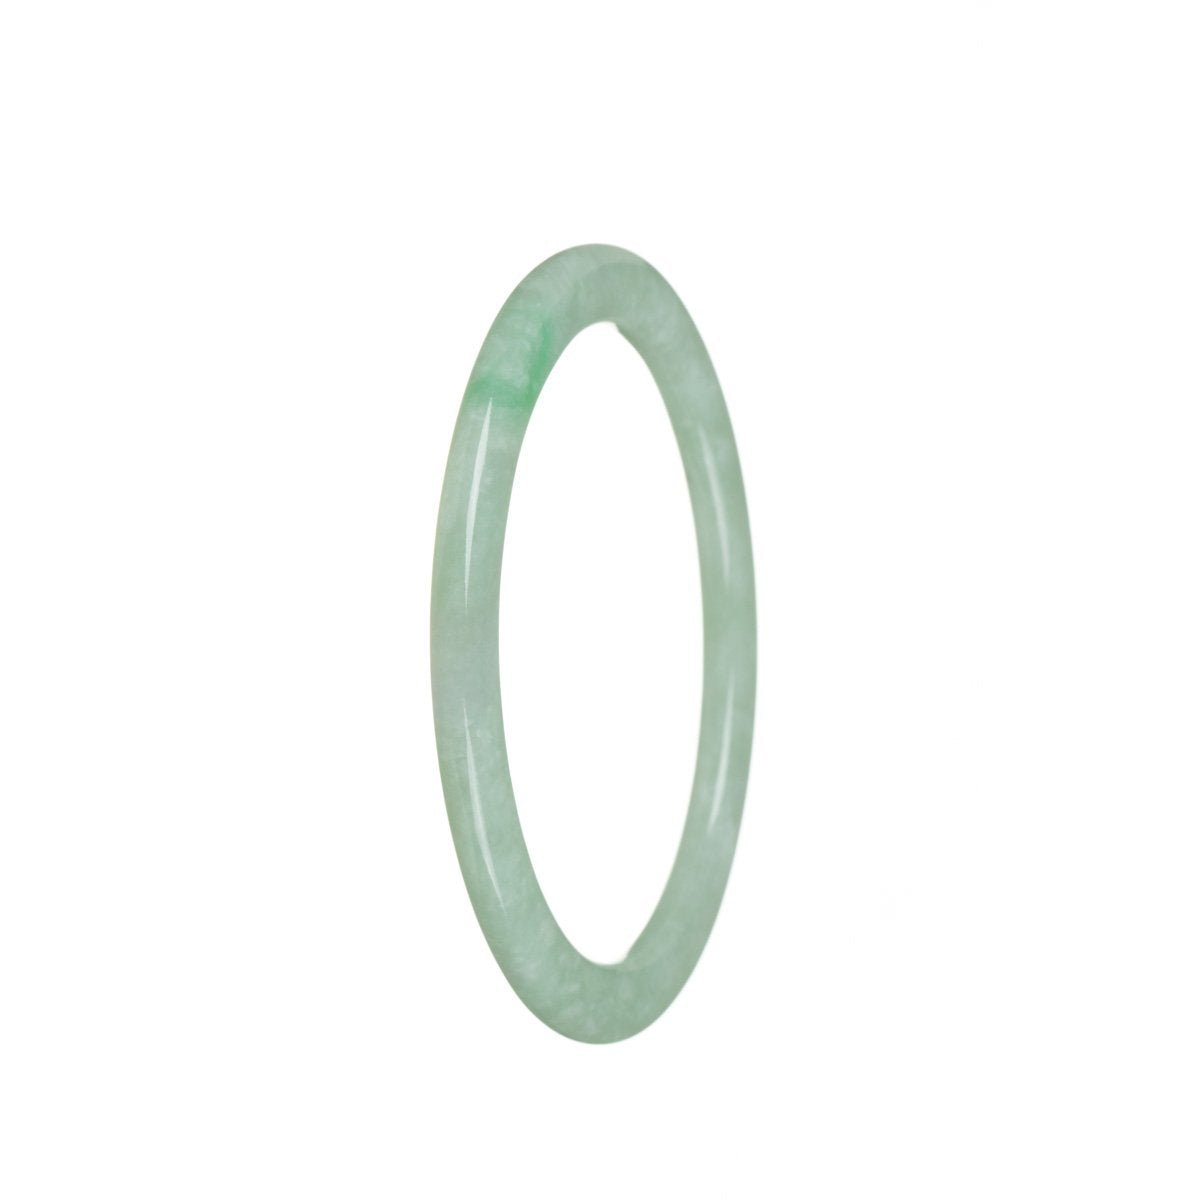 A beautiful oval-shaped green jadeite bangle bracelet, crafted with real grade A jadeite. The bracelet measures 57mm in diameter. Designed by MAYS™.